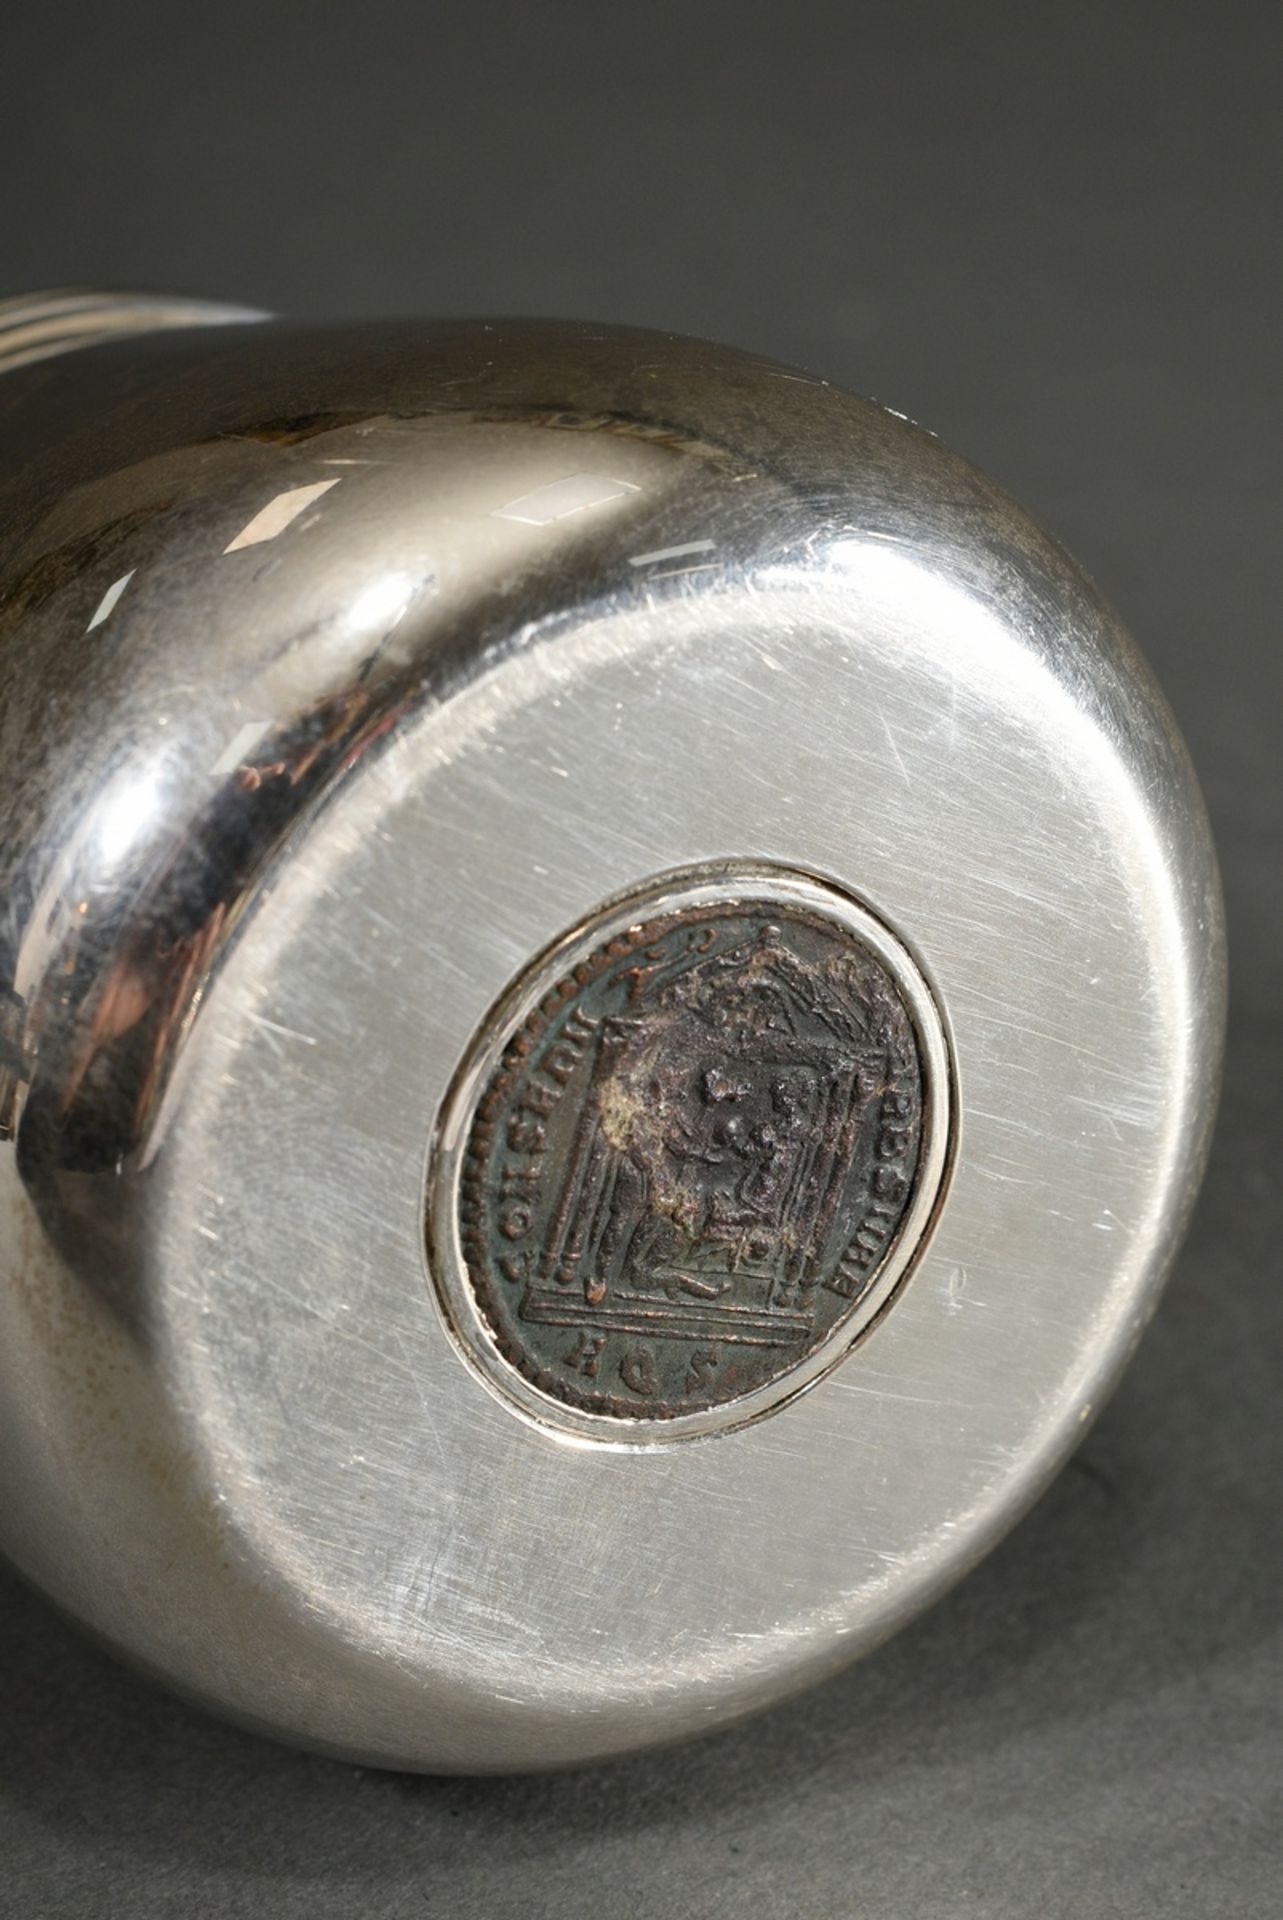 Bulgari vessel with ebony-covered handle on the side and antique coin in the base, signed, silver 9 - Image 4 of 6